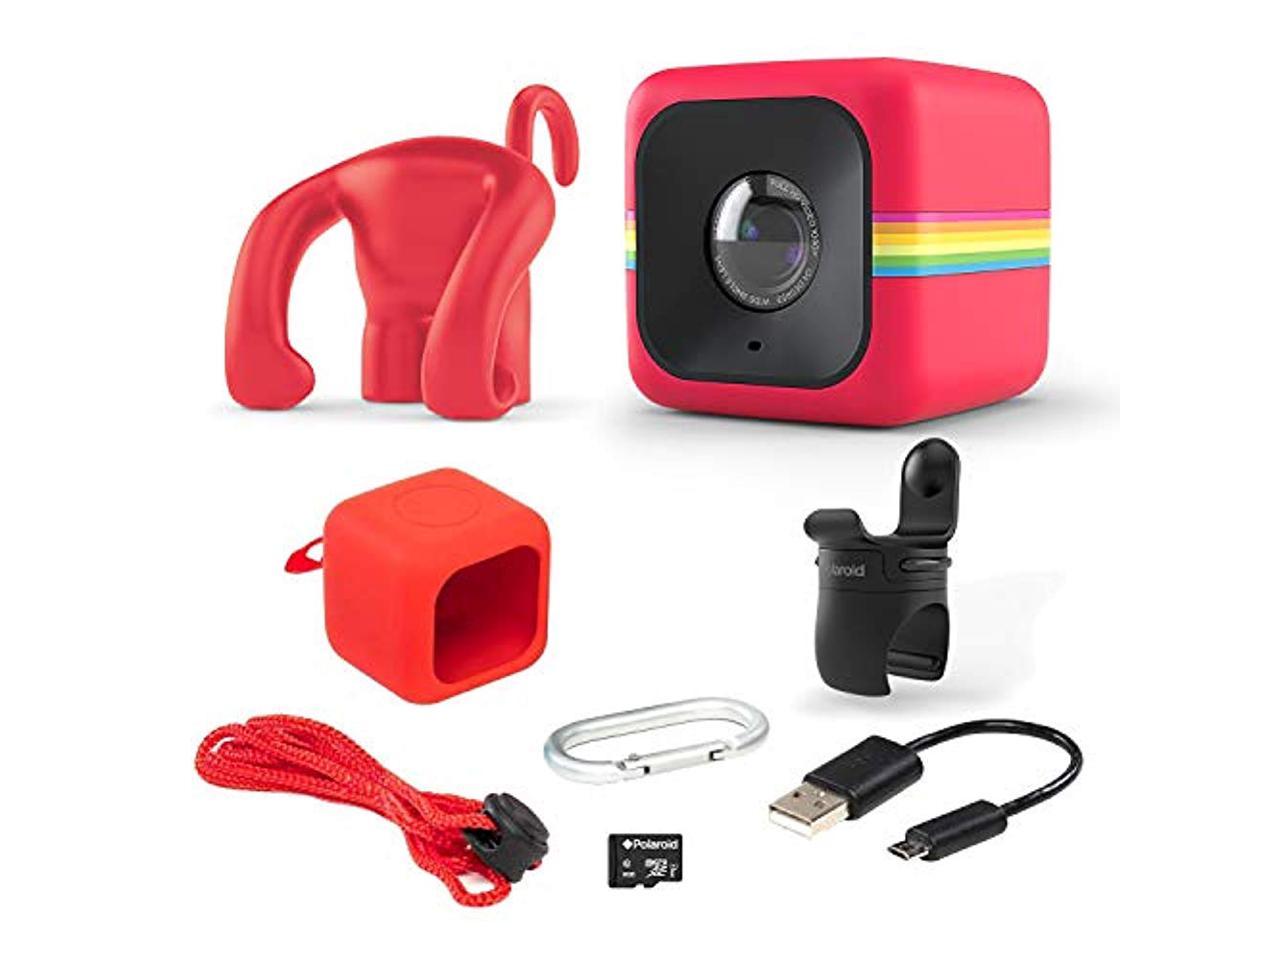 polaroid lifestyle cube act two hd 1080p waterproof action & underwater wide angle sports video mini camera bundle red